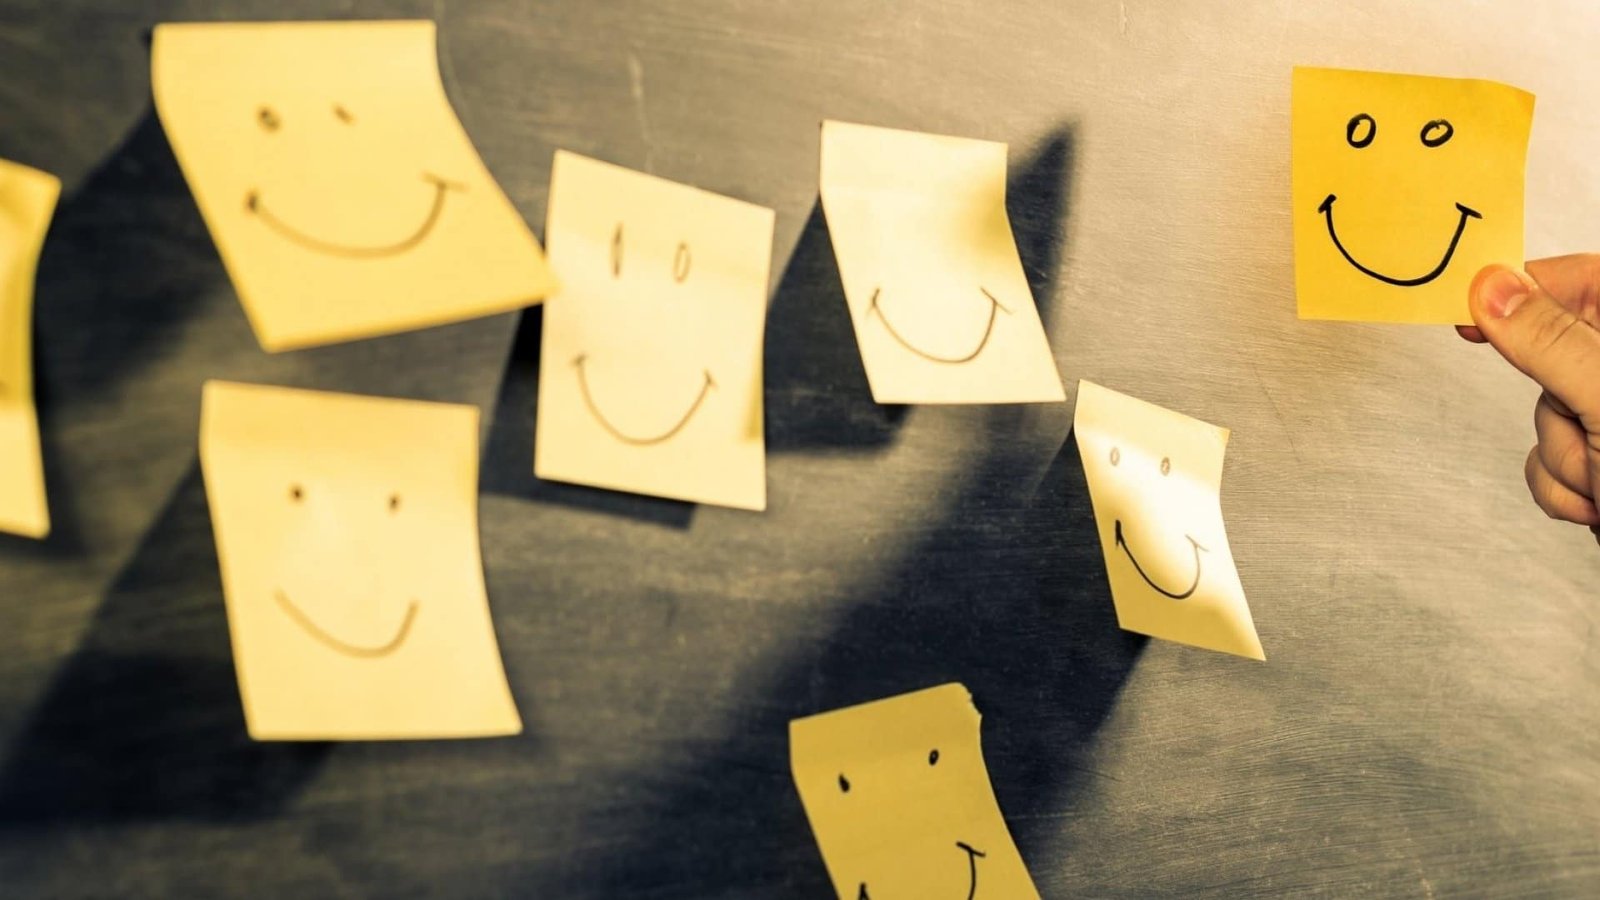 9 Little Things You Can Do To Brighten Someone’s Day